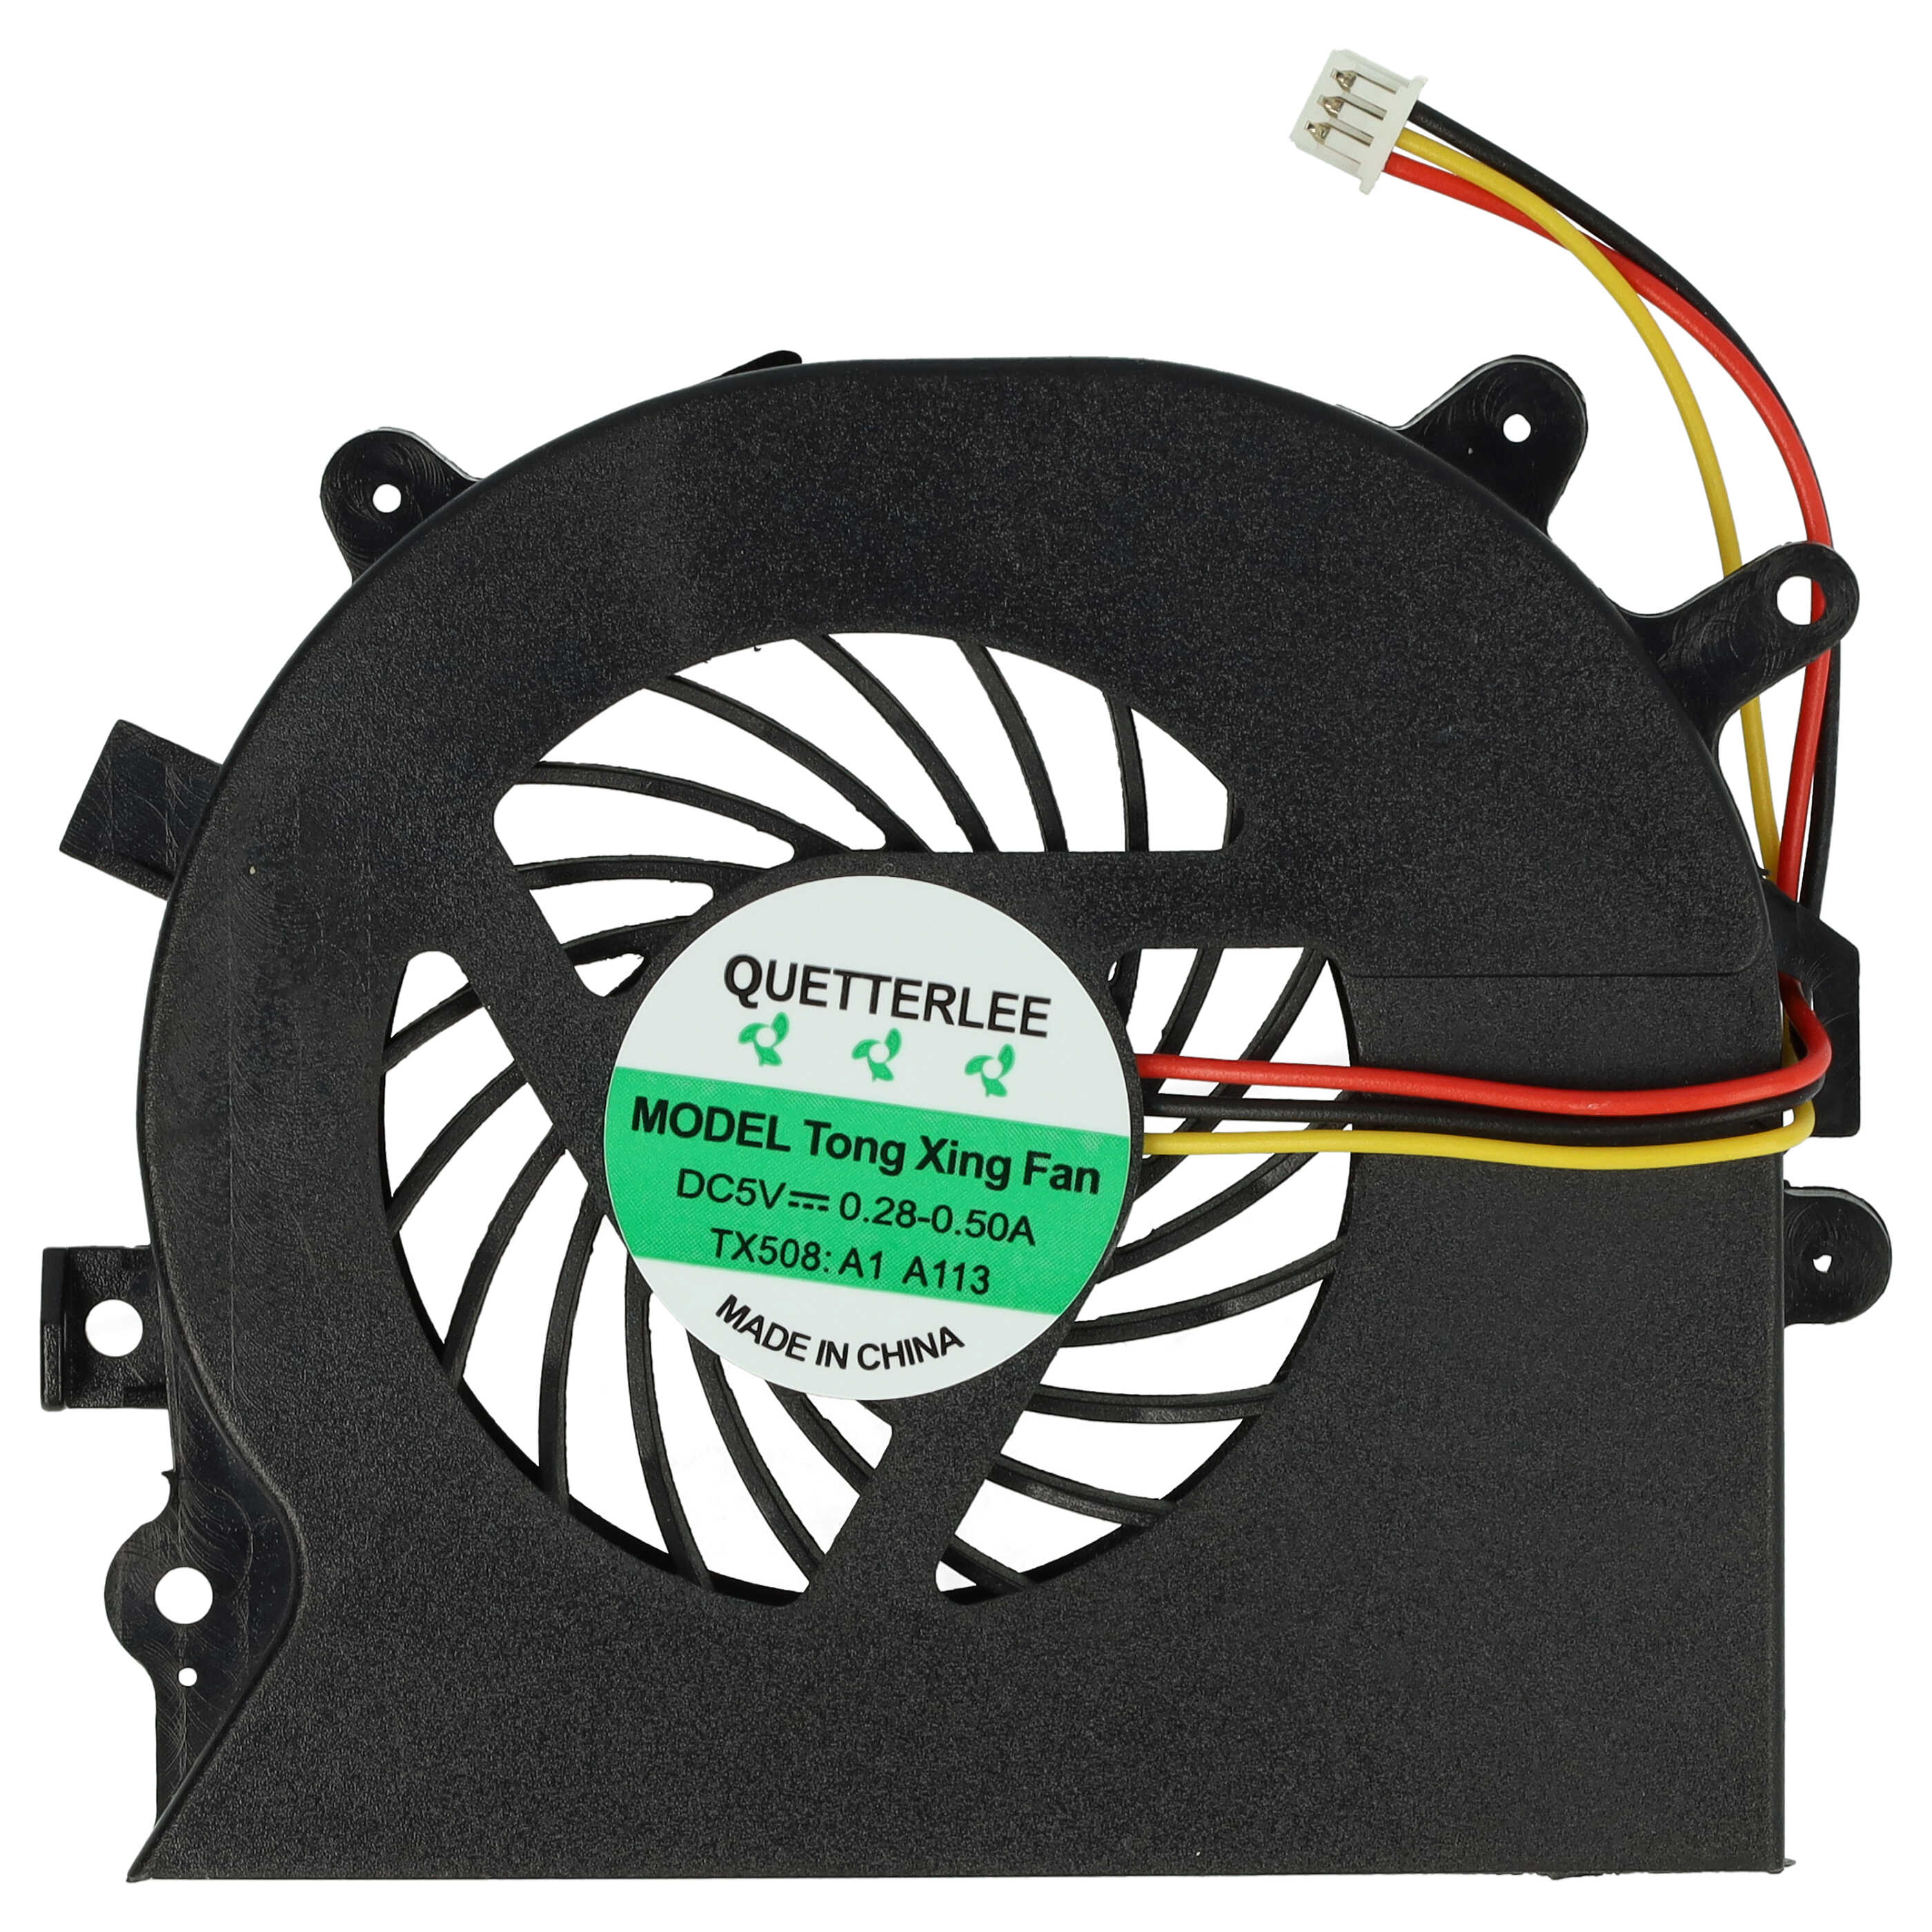 CPU / GPU Fan suitable for Sony Vaio PCG-61511L Notebook 81 x 65 x 12 mm